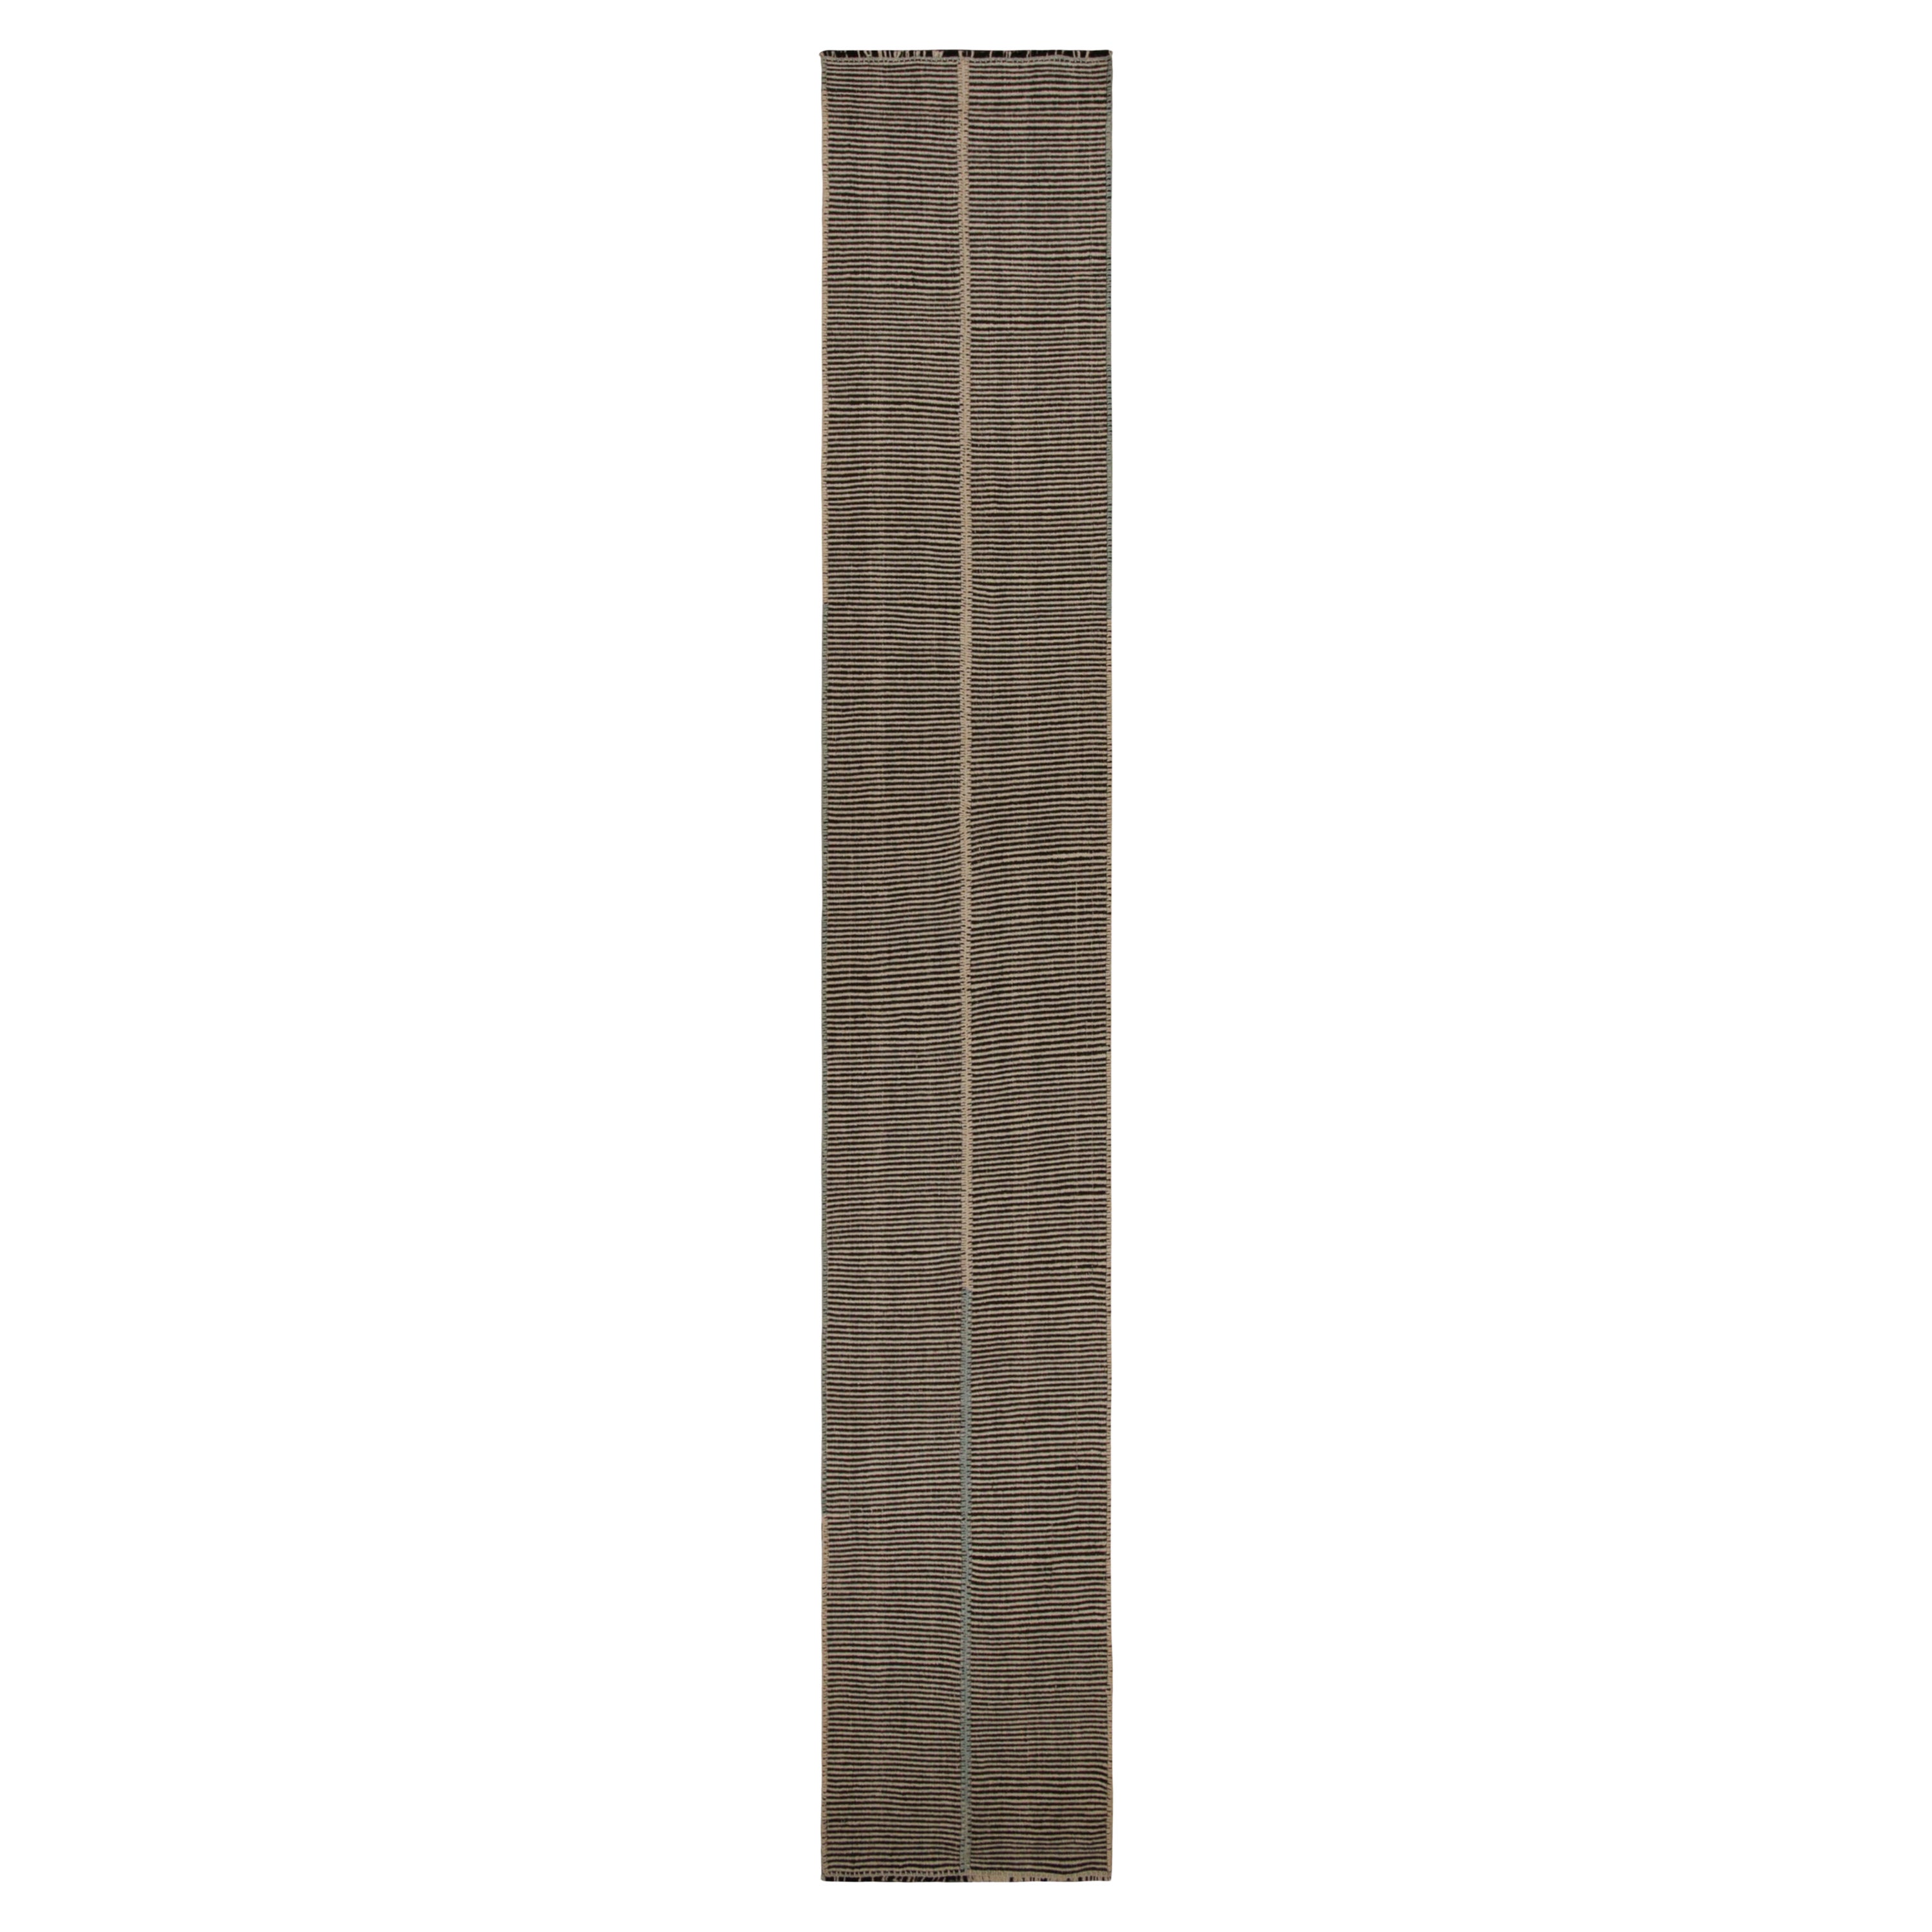 Rug & Kilim’s Contemporary Kilim Extra-Long Runner Rug, in Beige and Black For Sale